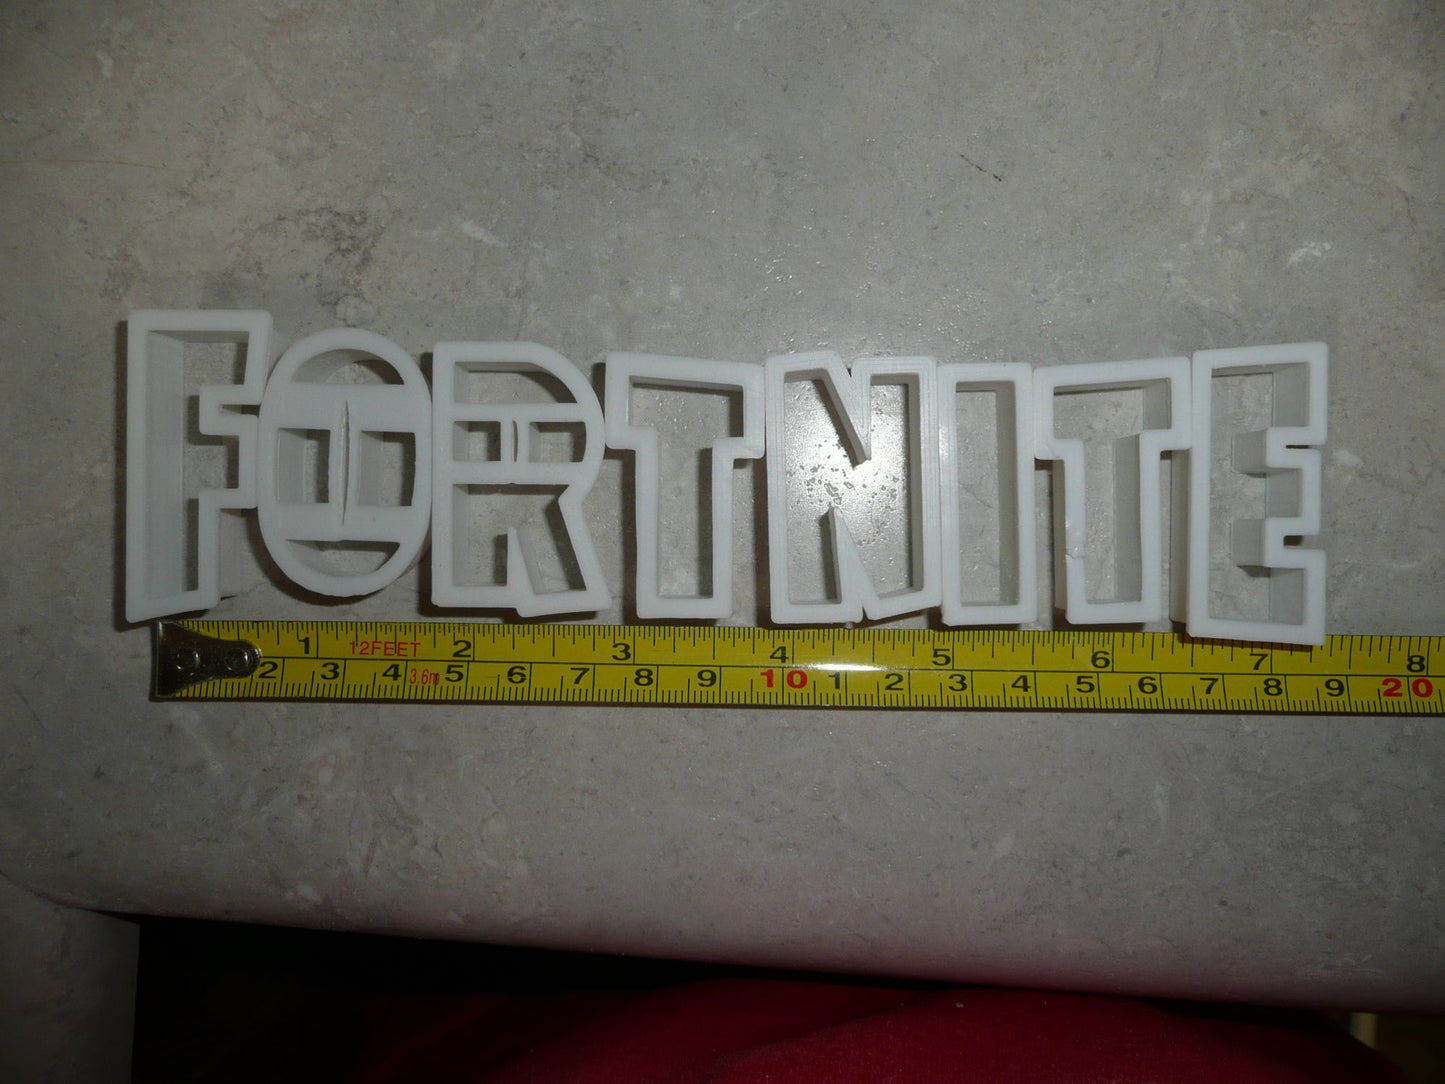 Fortnite Individual Letters 8 piece Video Game Cookie Cutter USA PR2847